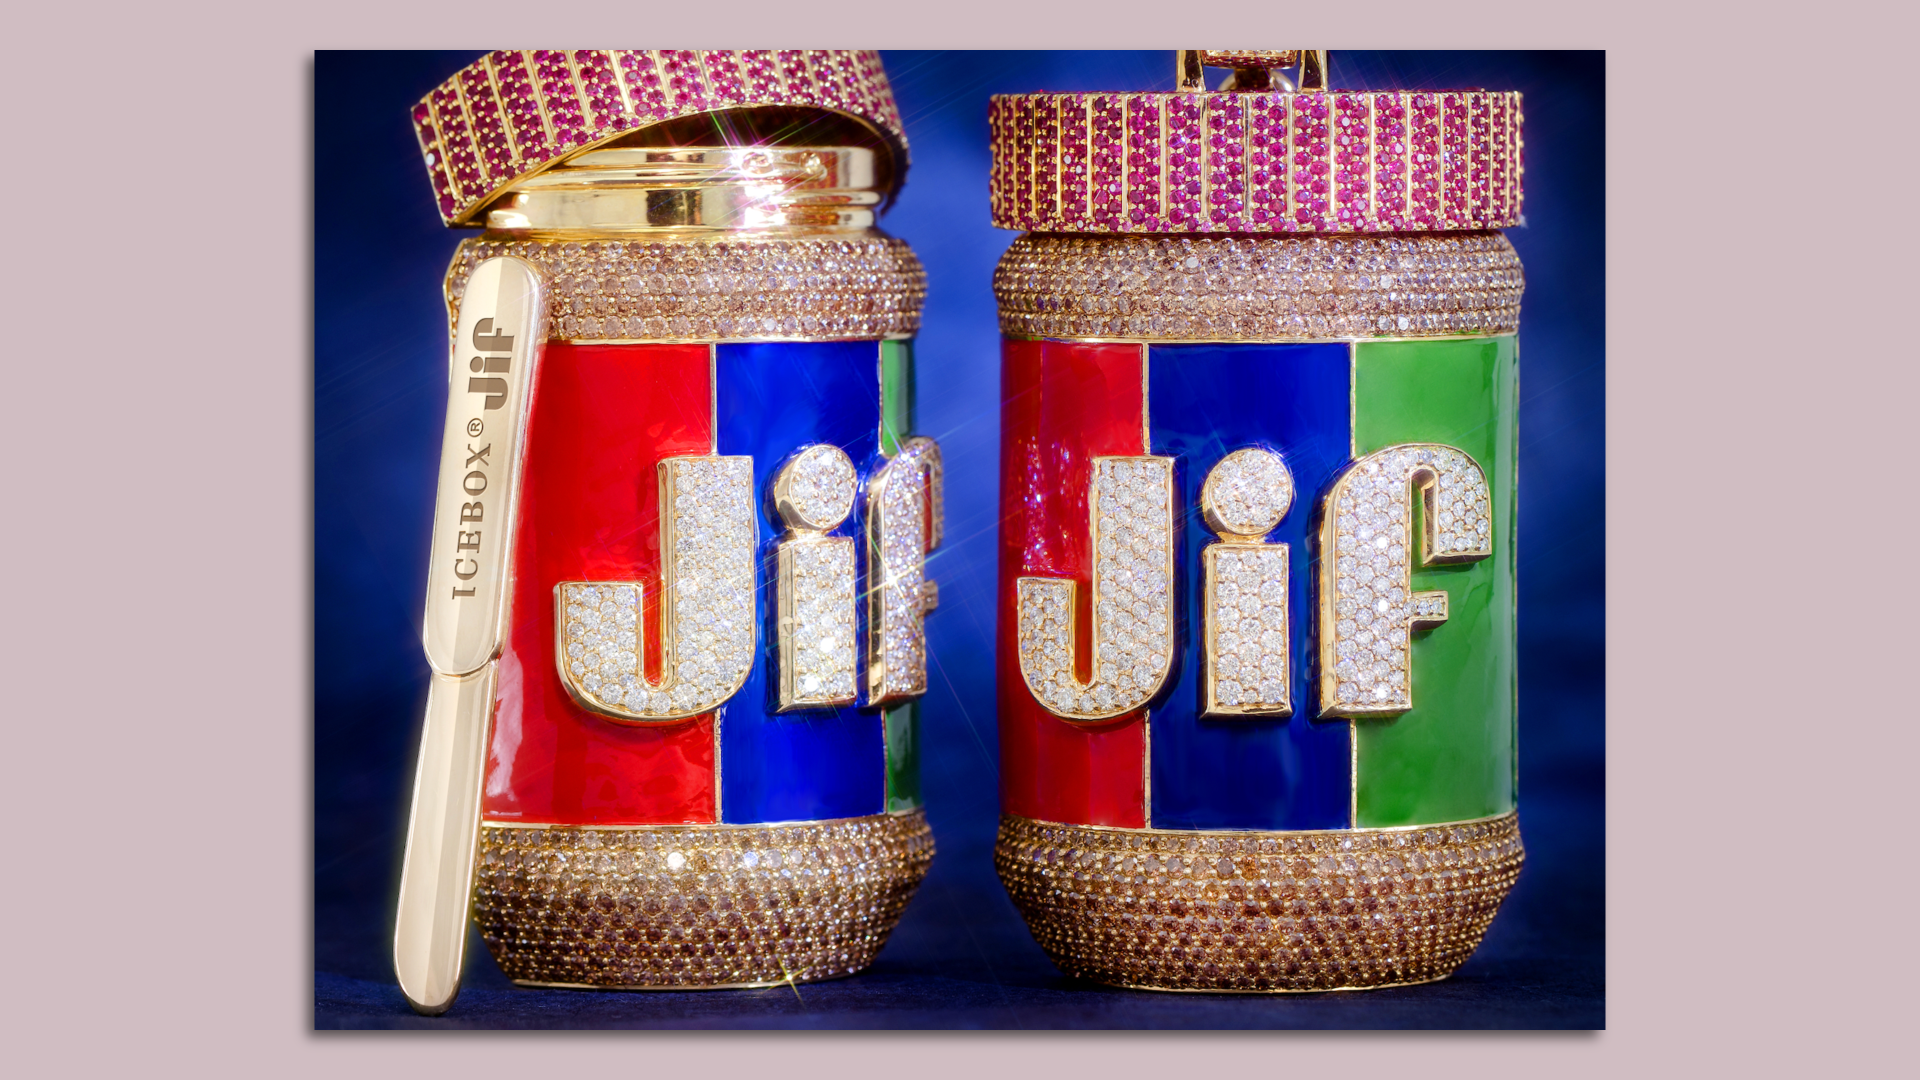 A photo of a diamond-covered pendant of Jif peanut butter jars with a gold butter knife